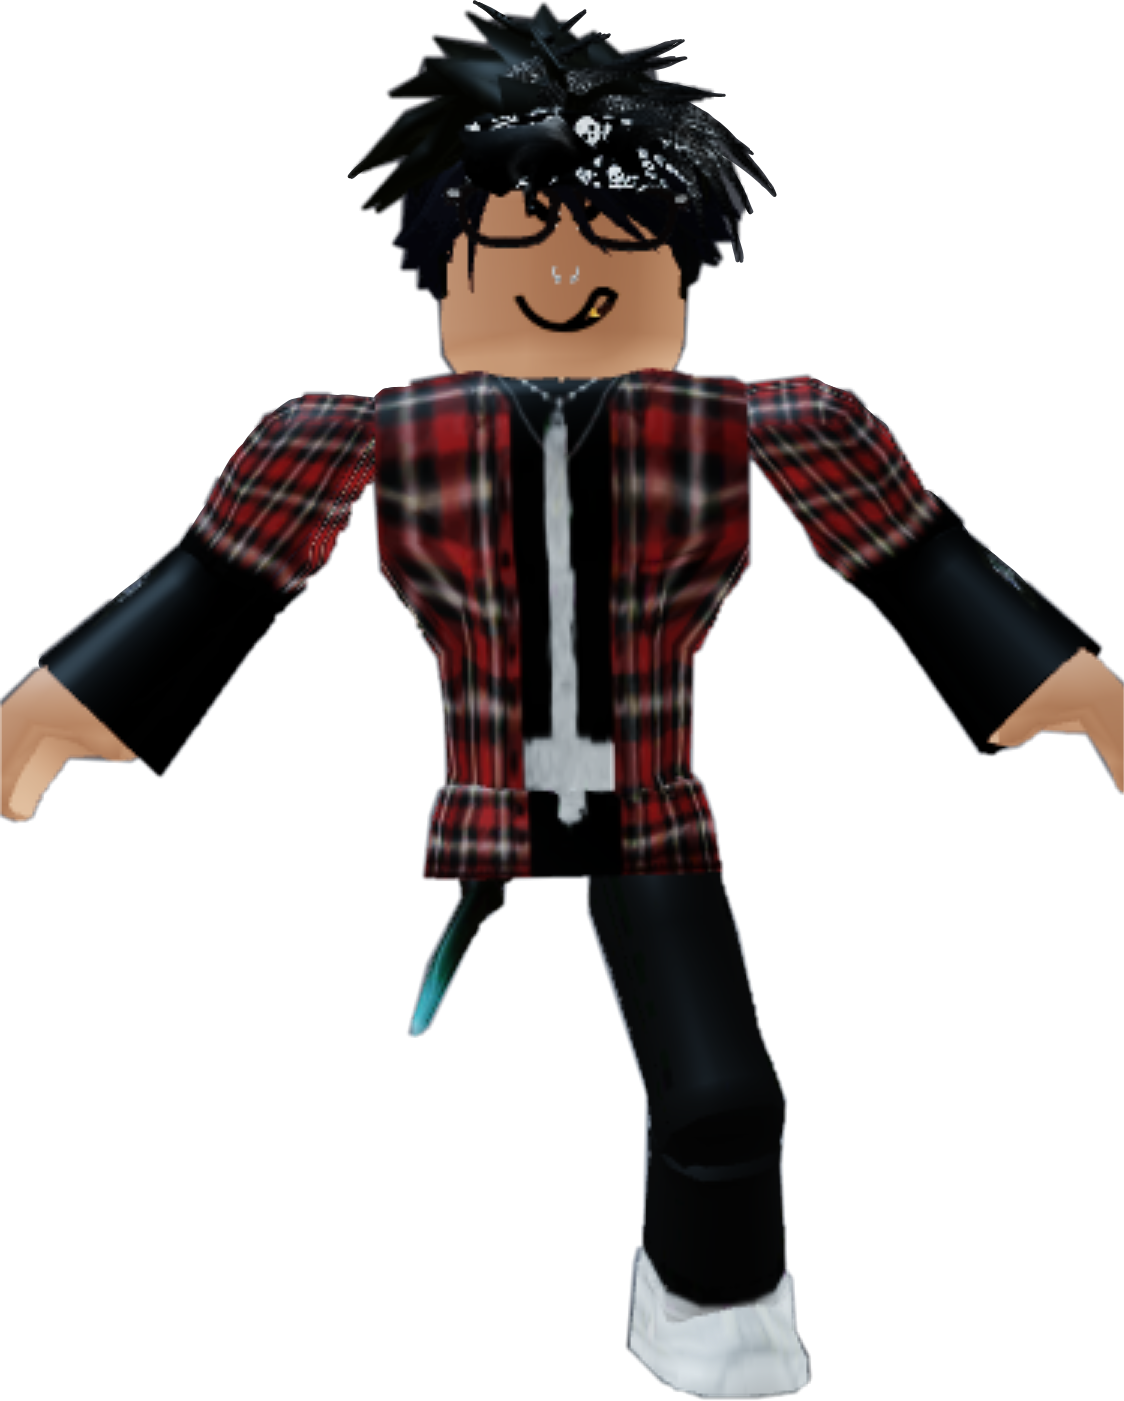 Copy And Paste Roblox Avatar - copy and paste roblox avatar